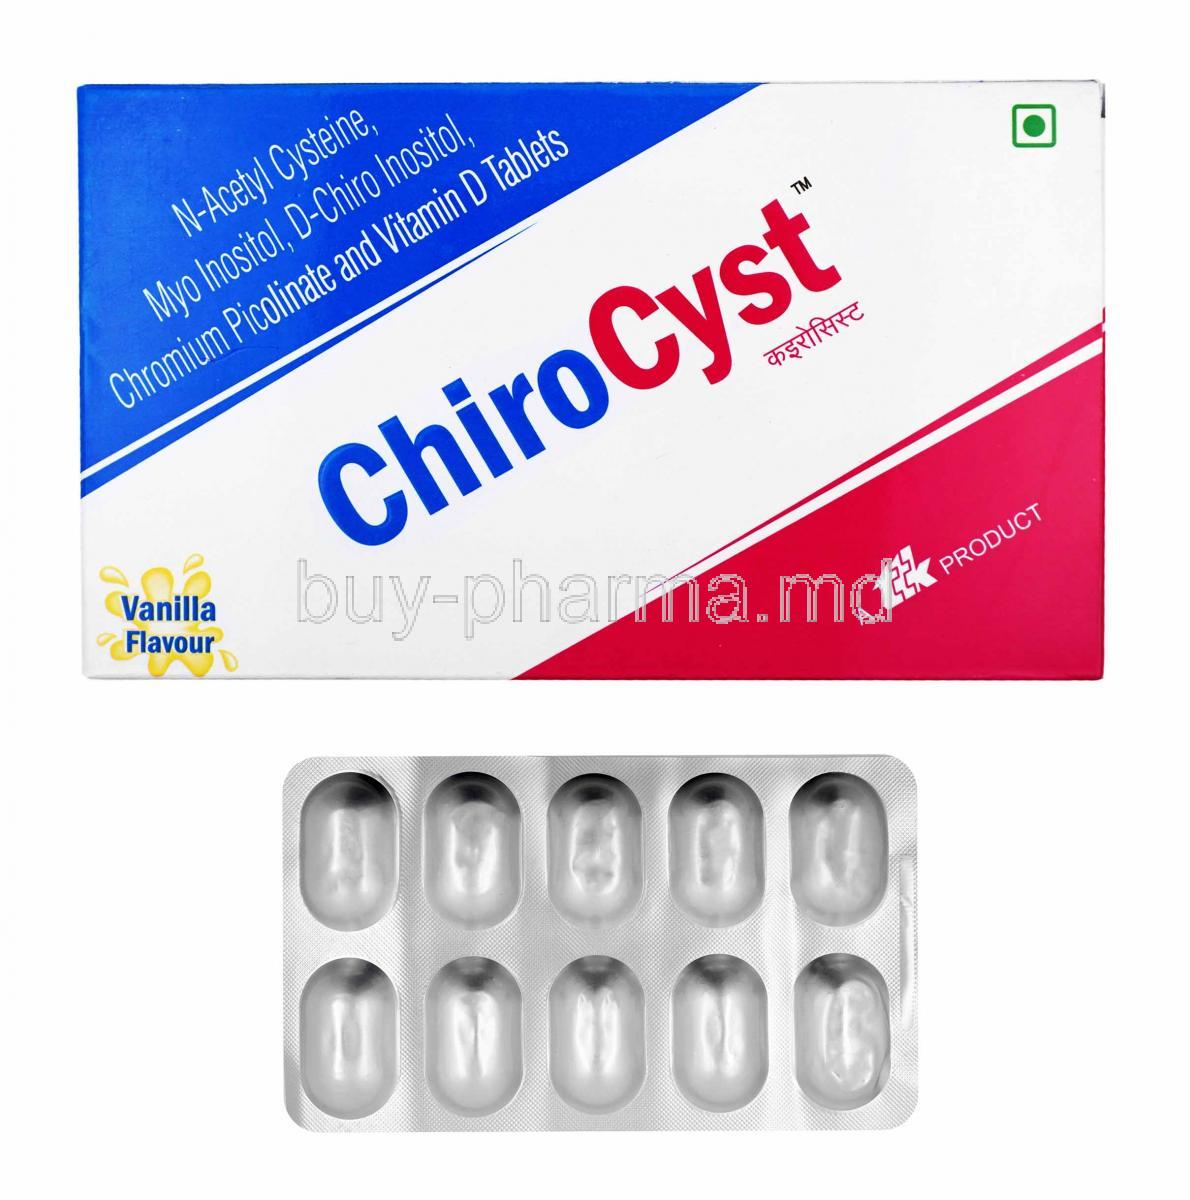 Chirocyst box and tablets